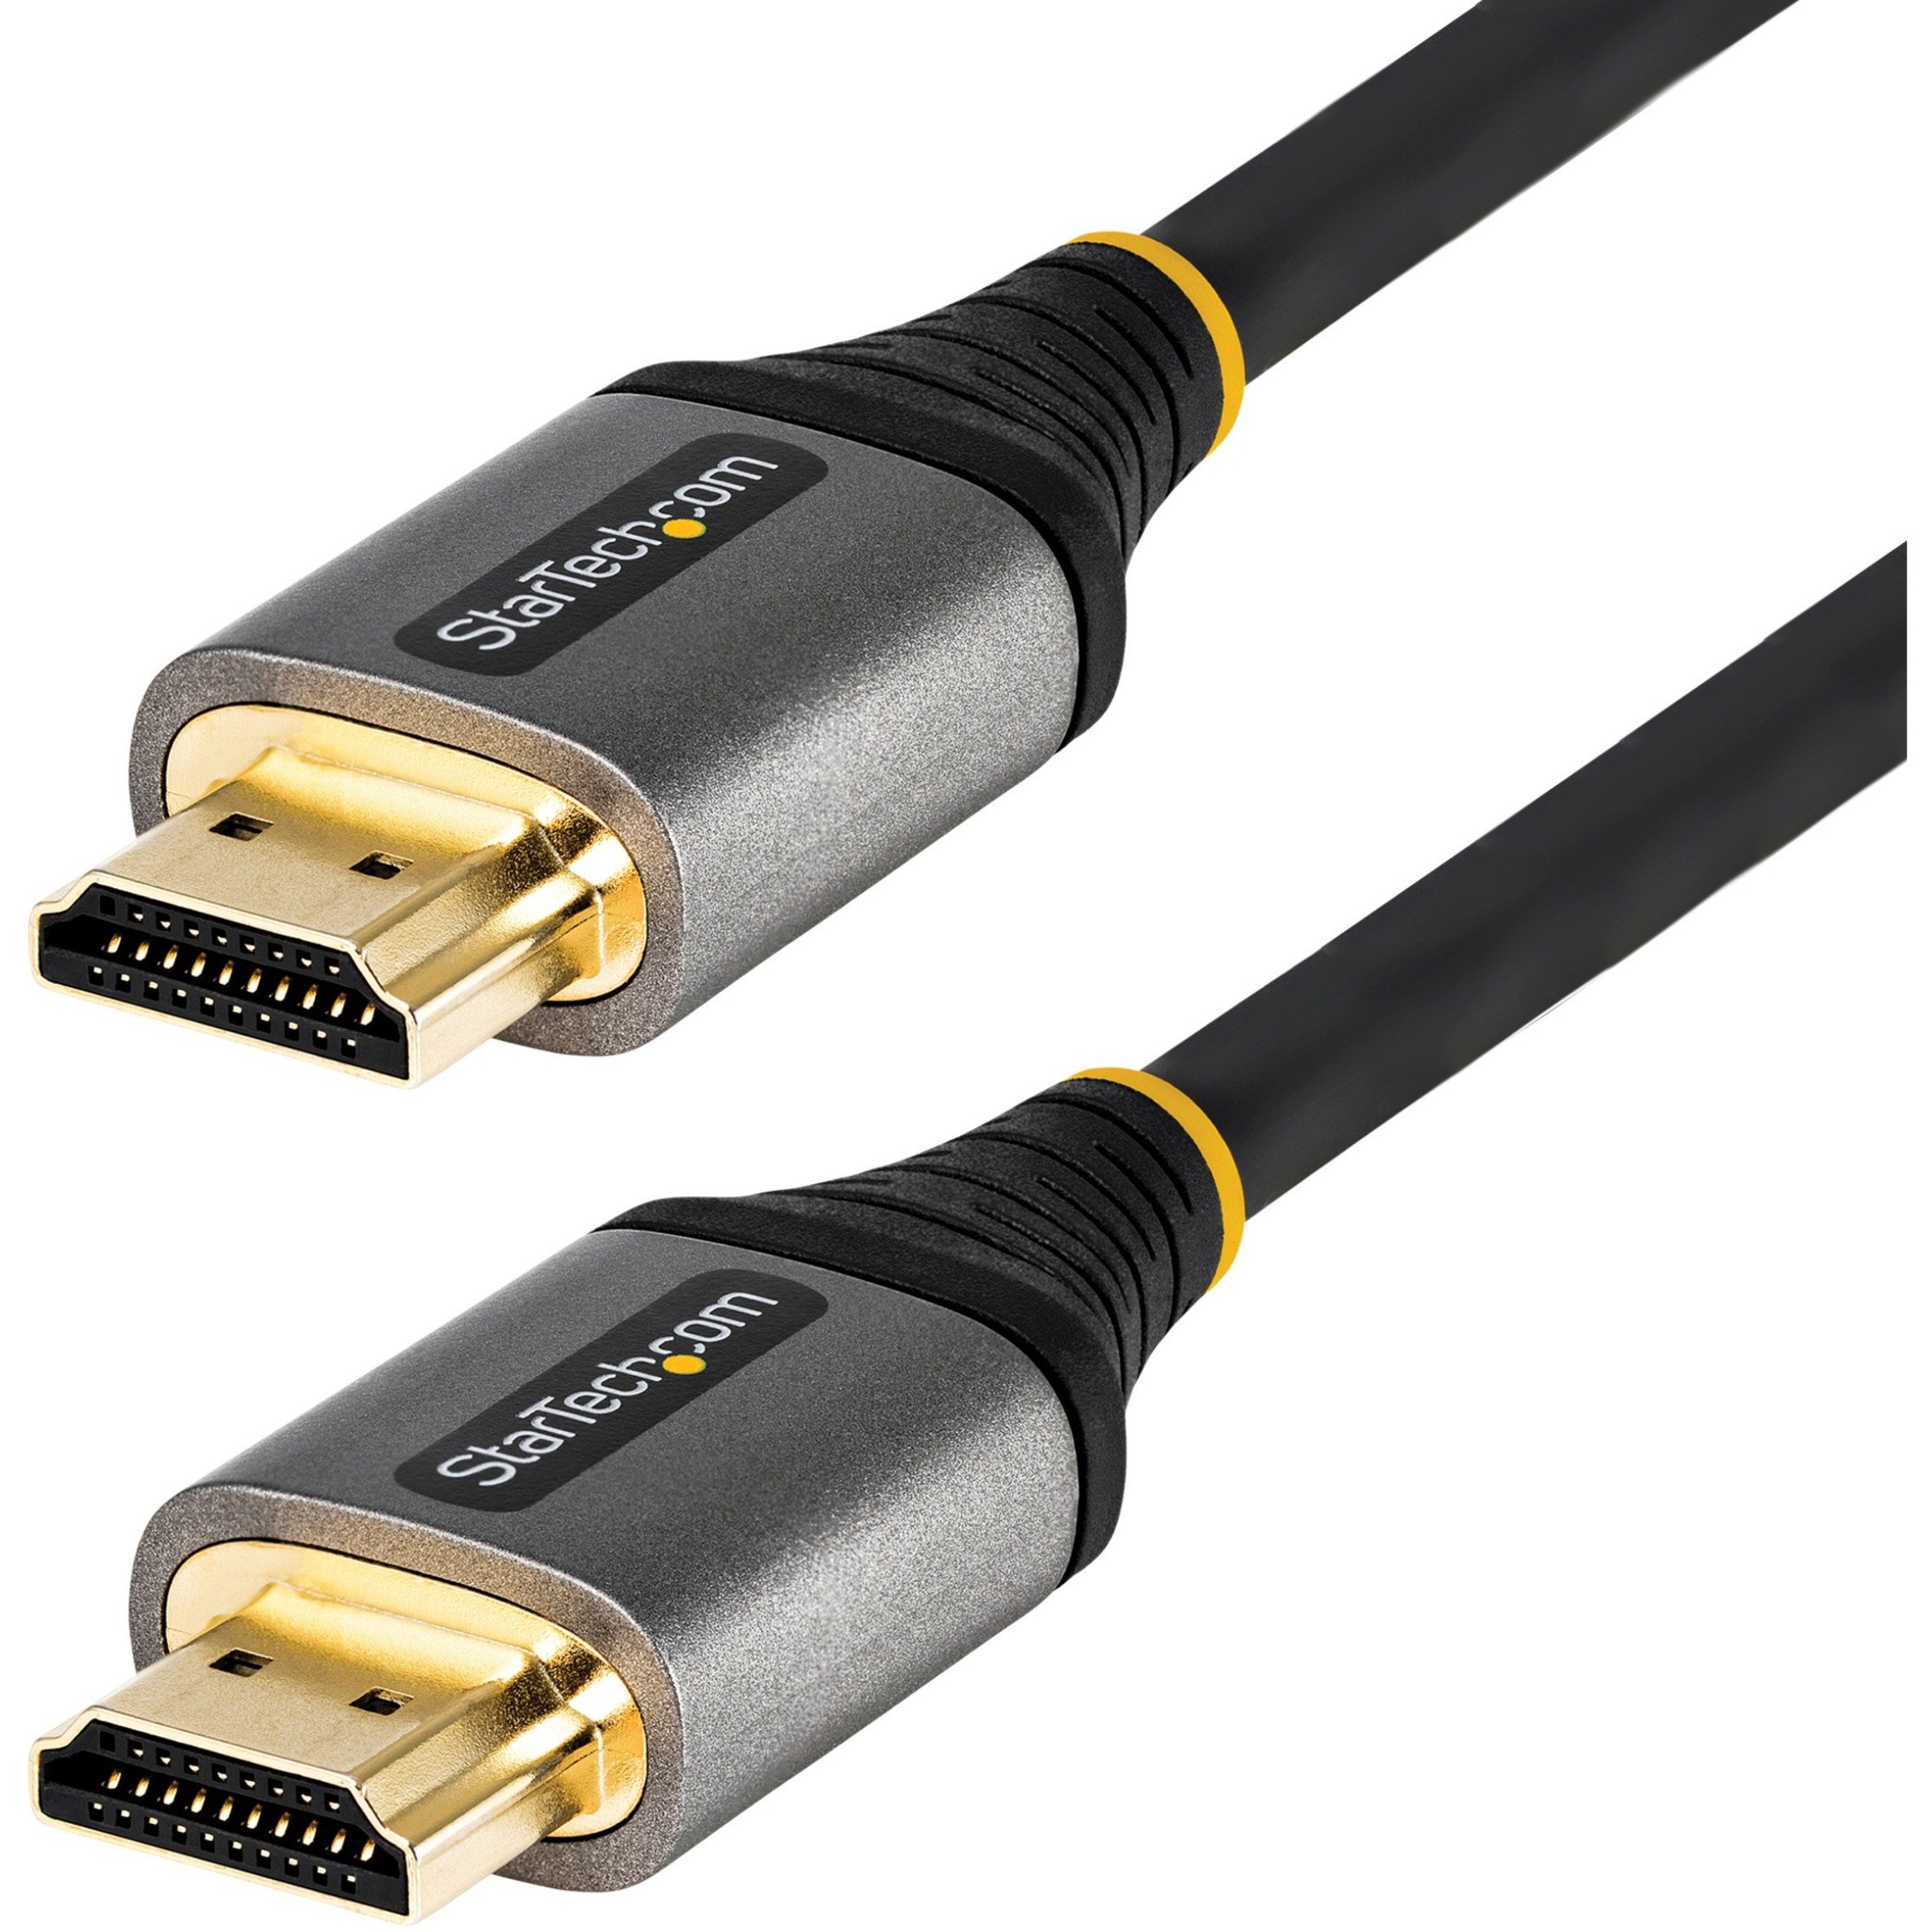 Startech .com 10ft/3m HDMI 2.1 Cable, Certified Ultra High Speed Cable 48Gbps, 8K 60Hz/4K 120Hz HDR10+, 8K HDMI Cable, Monitor/Display9... HDMM21V3M - Corporate Armor